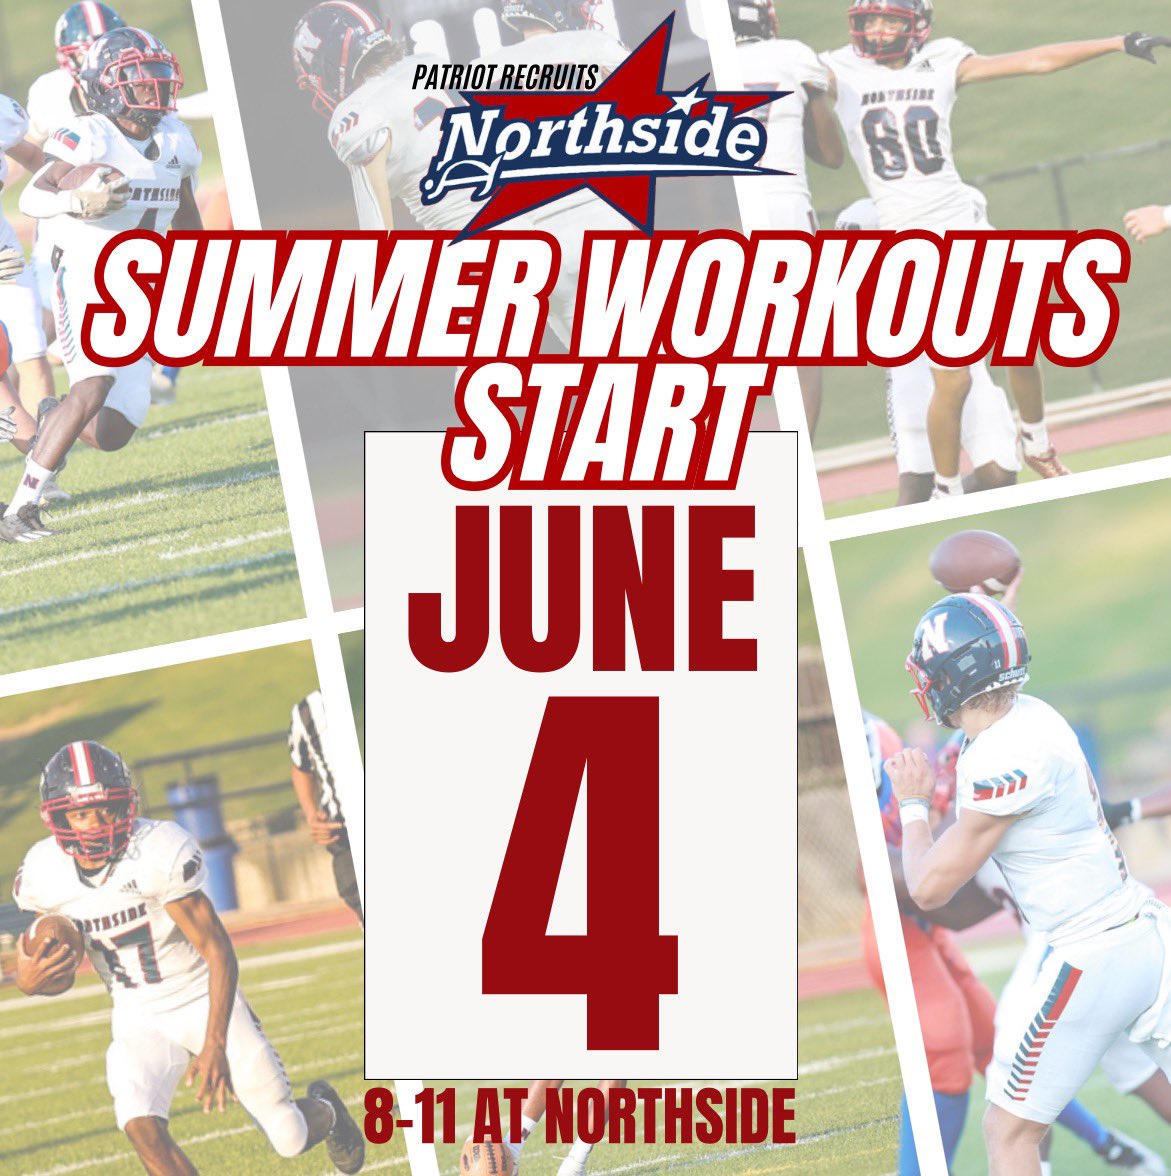 🚨Attention🚨 Current 8th graders attending Northside next school year. Summer workouts start June 4th from 8:00-11:00 AM at Northside. Please contact Coach Oropeza at oropeza.andrew.j@muscogee.k12.ga.us for more details. @BigFaceSportss @DC_Sports_706